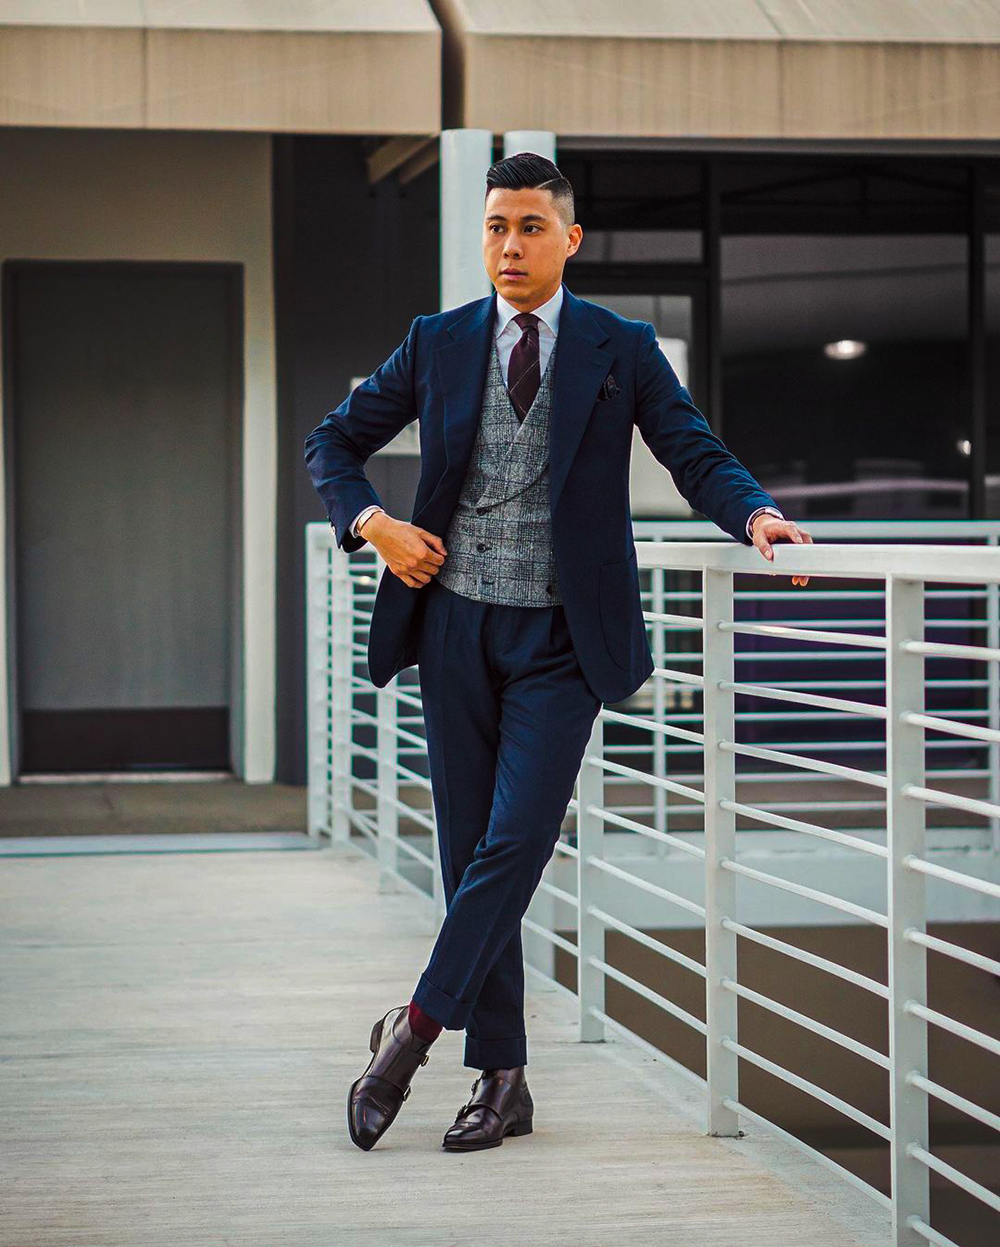 Navy suit, gray plaid waistcoat, dress shirt, and monks outfit